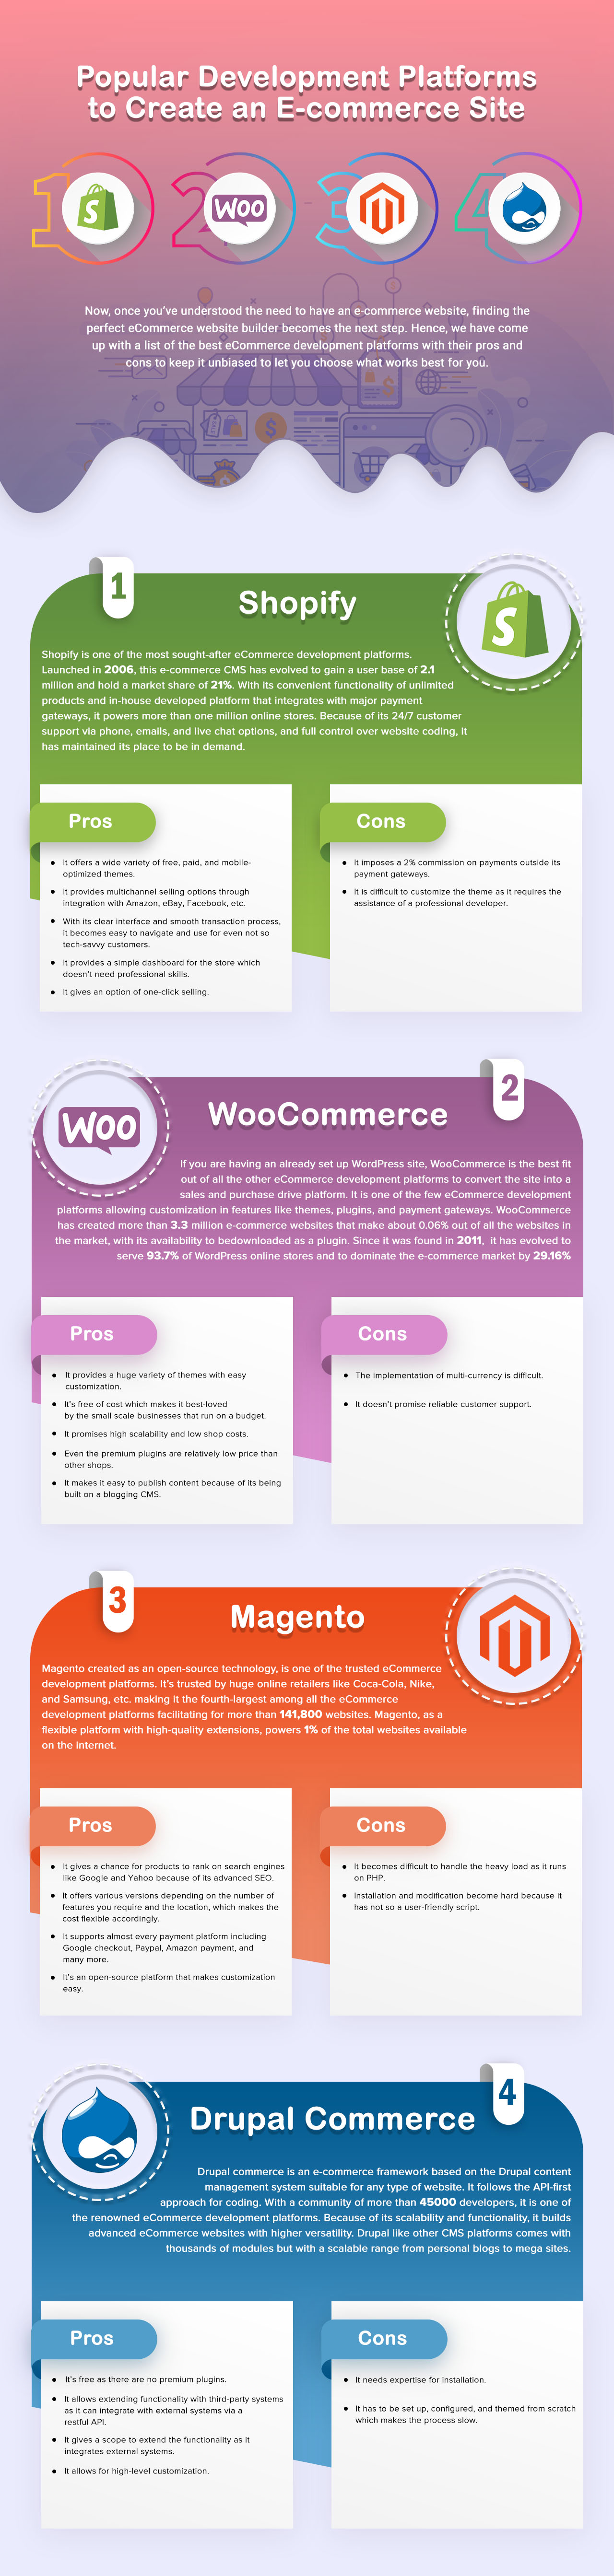 Choose The Best Platform To Build An E-Commerce Website For Your Business.